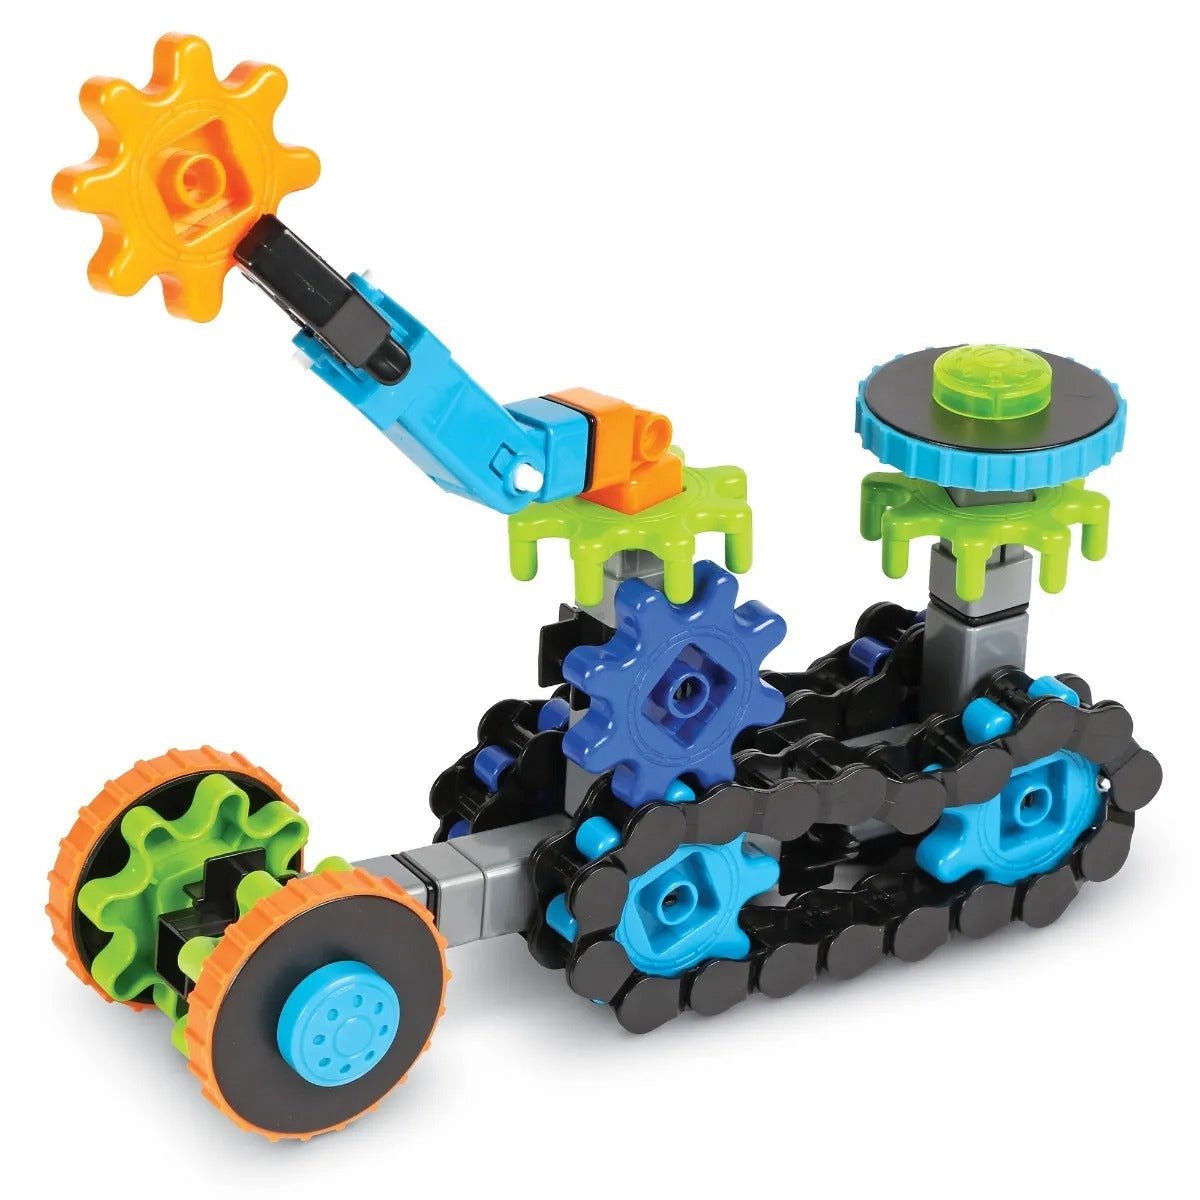 Gears Gears Gears Robots In Motion, Use the Gears! Gears! Gears Robots In Motion to design and build your own twisting, turning, moving robot toy with Gears! Gears! Gears!®. The Gears! Gears! Gears Robots In Motion come supplied with 116 pieces, this construction set includes components for children to design and build robots, cars and machines that move and transform. Follow along with the included STEM Activity Guide or build your own unique robo-toy with rolling treads, spinning eyes and more. There will